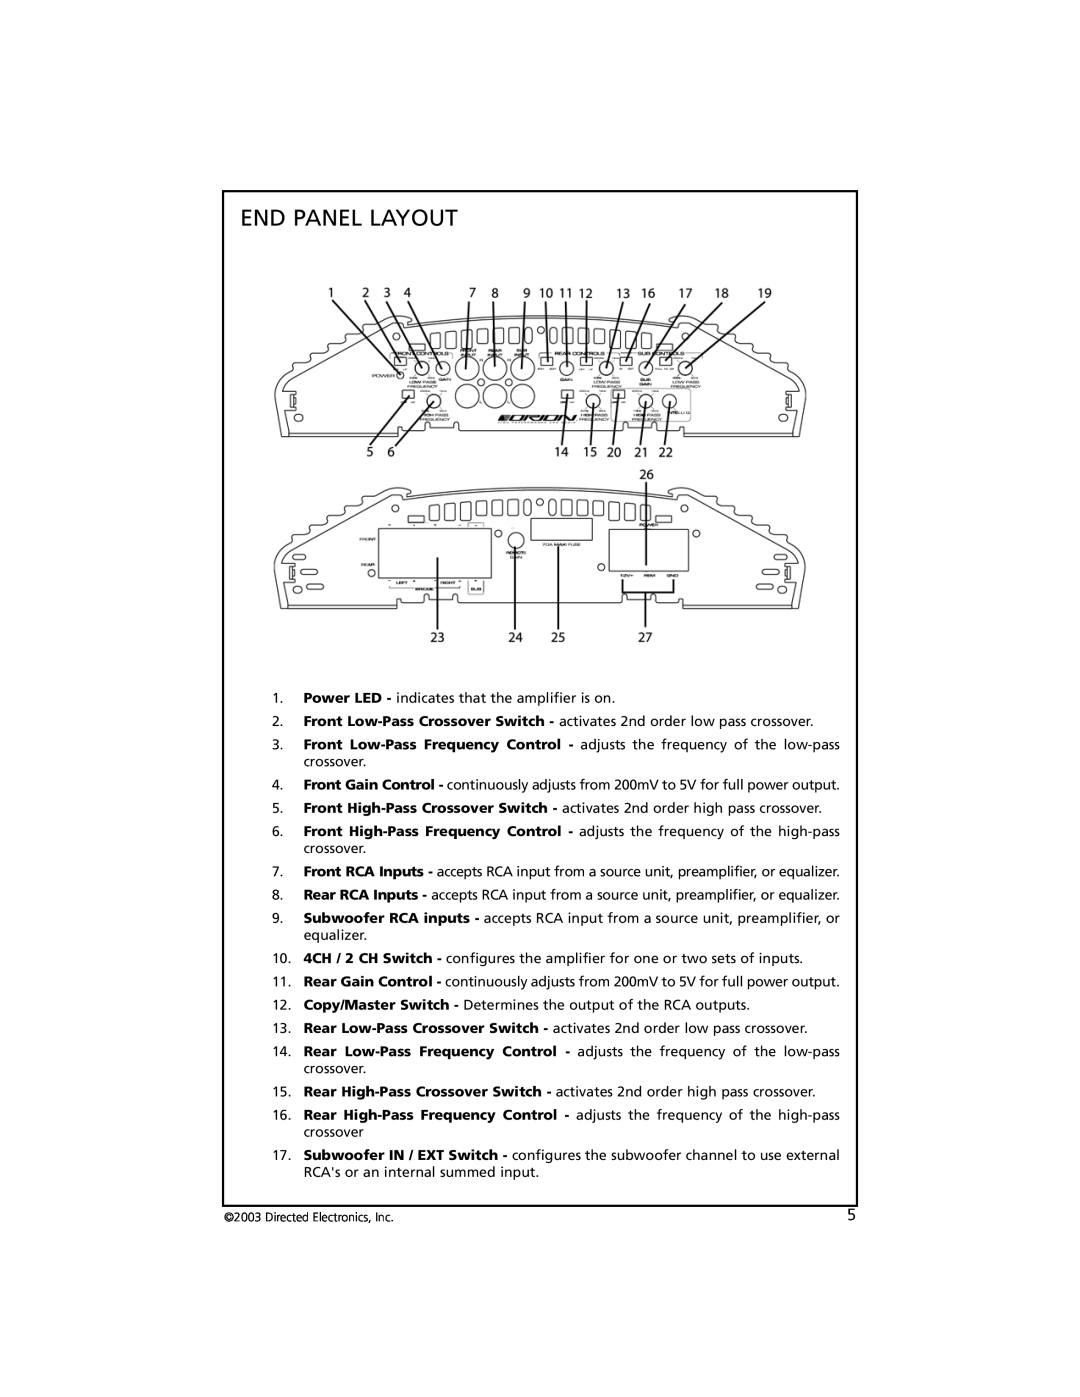 Orion Car Audio 7005 manual End Panel Layout 